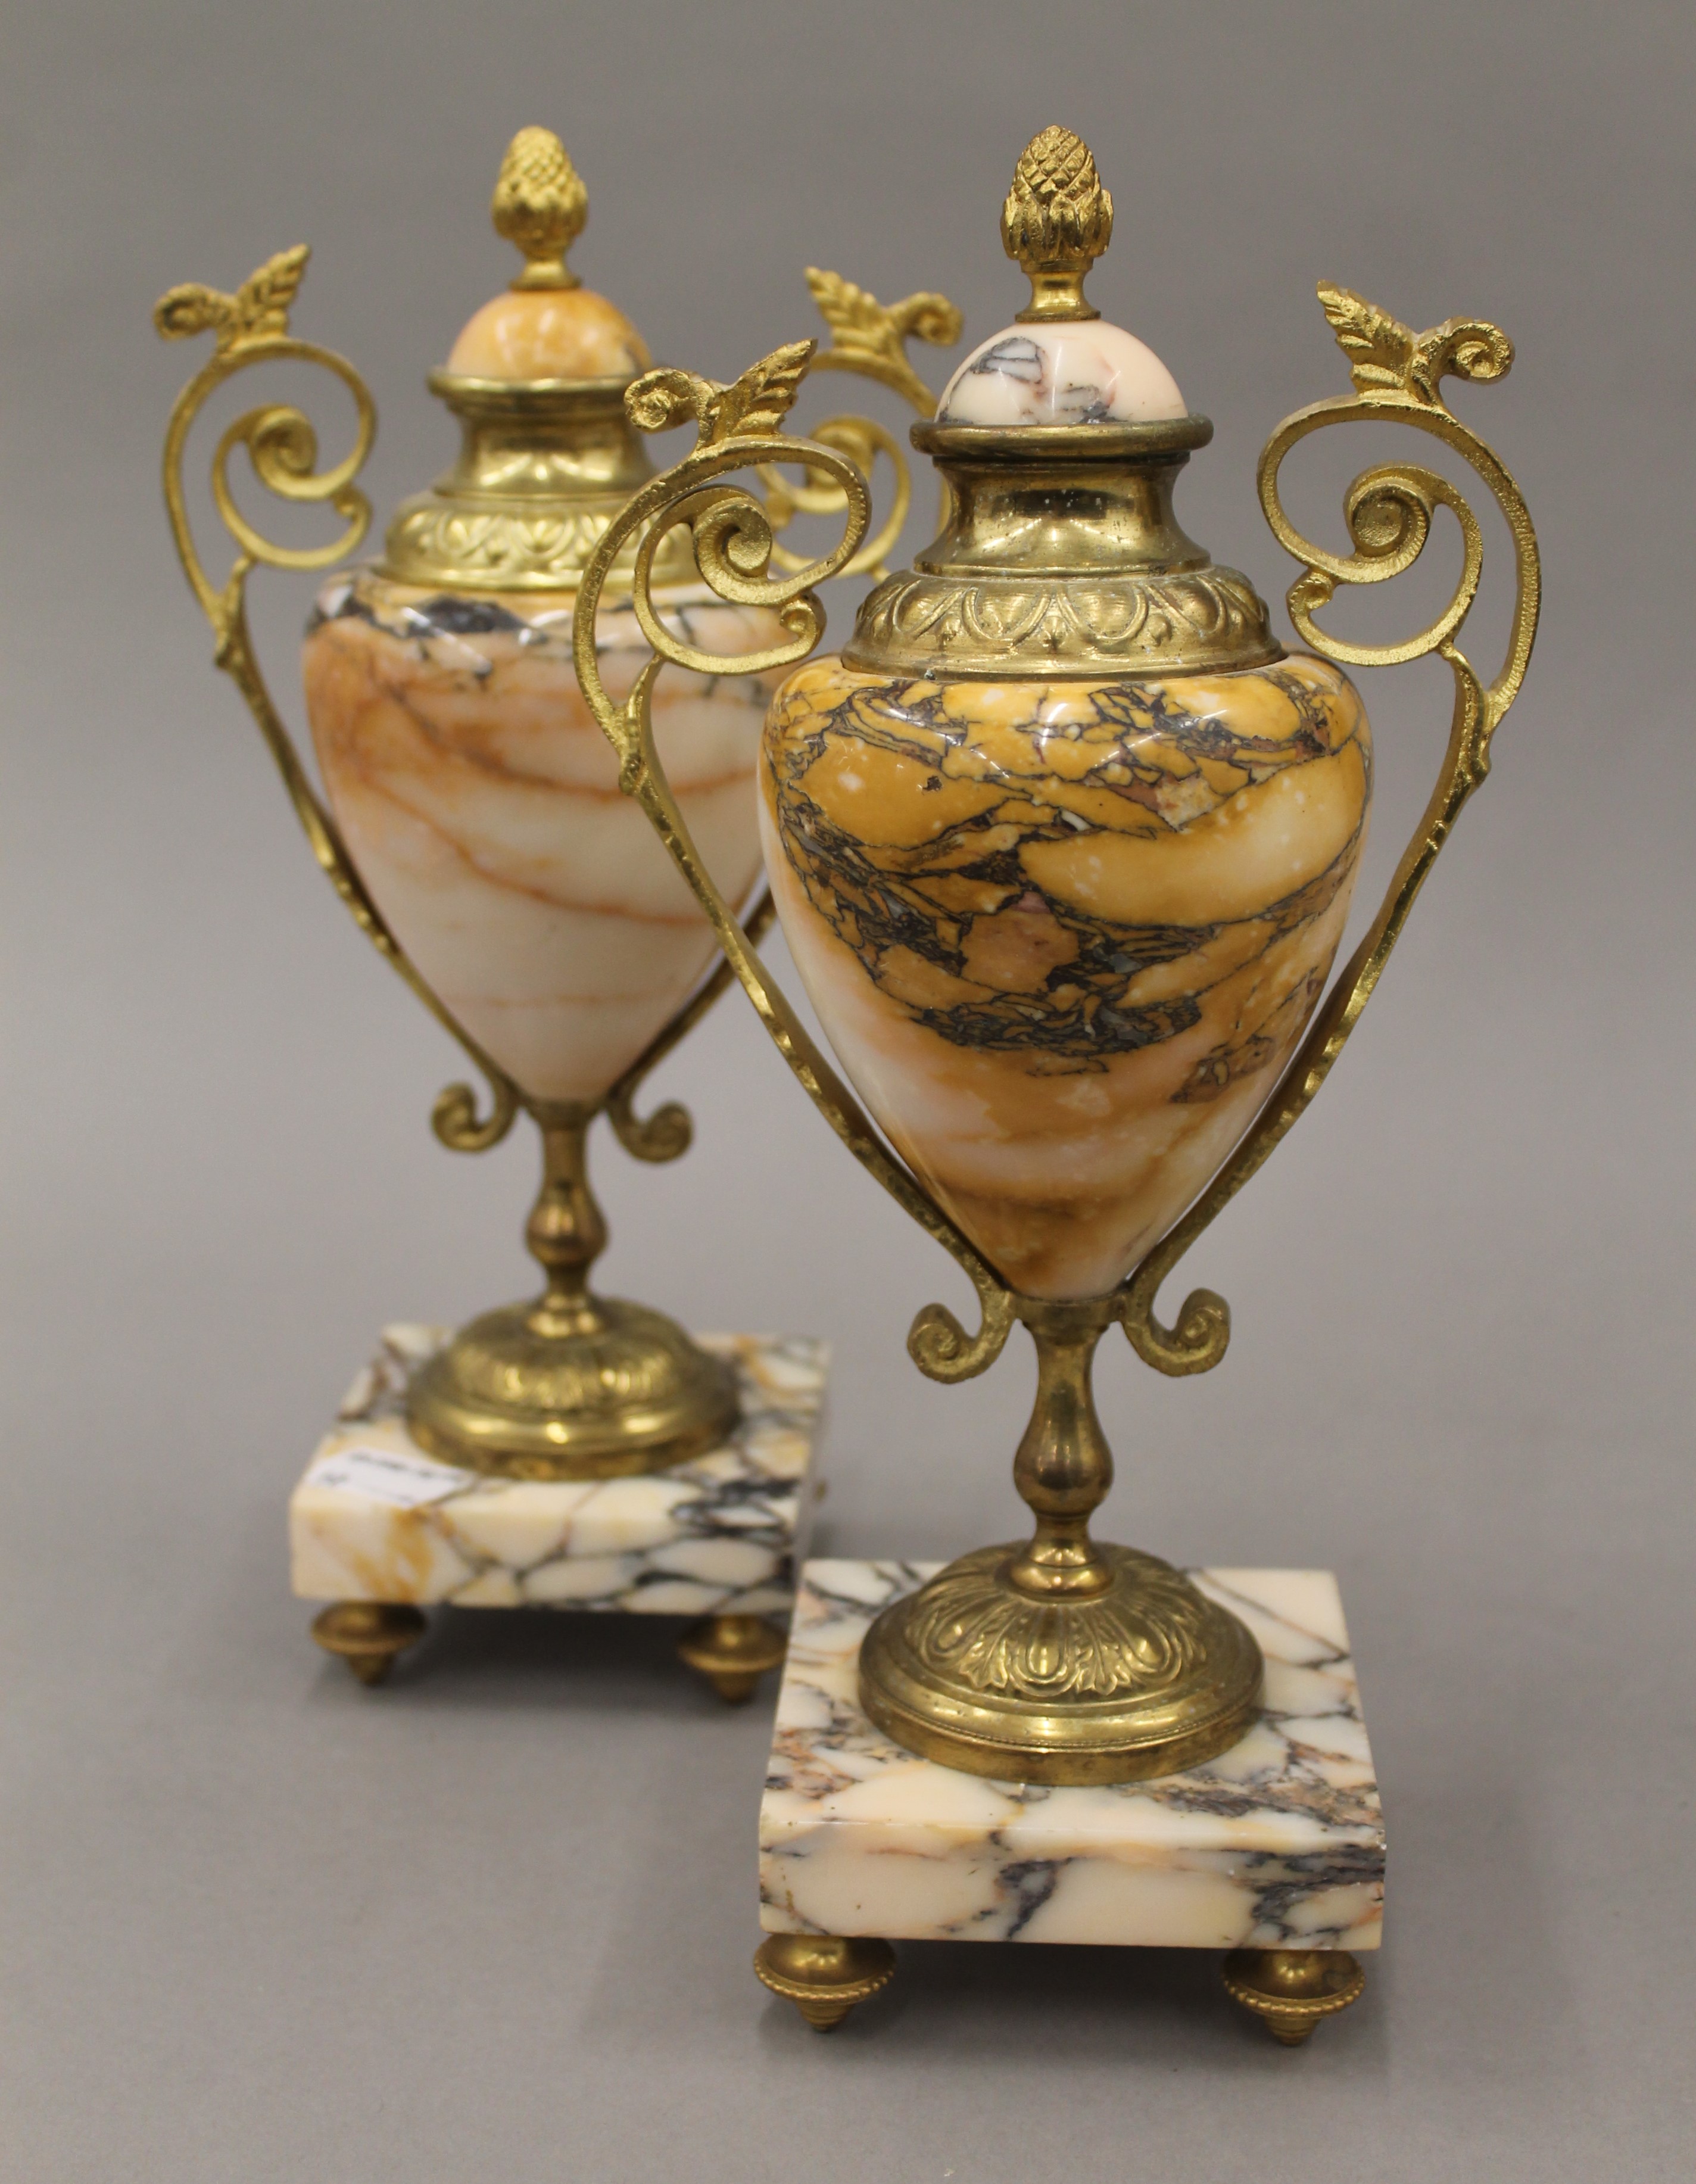 A marble and ormolu clock garniture with pendulum and key, with enamel dial and striking movement. - Image 9 of 14